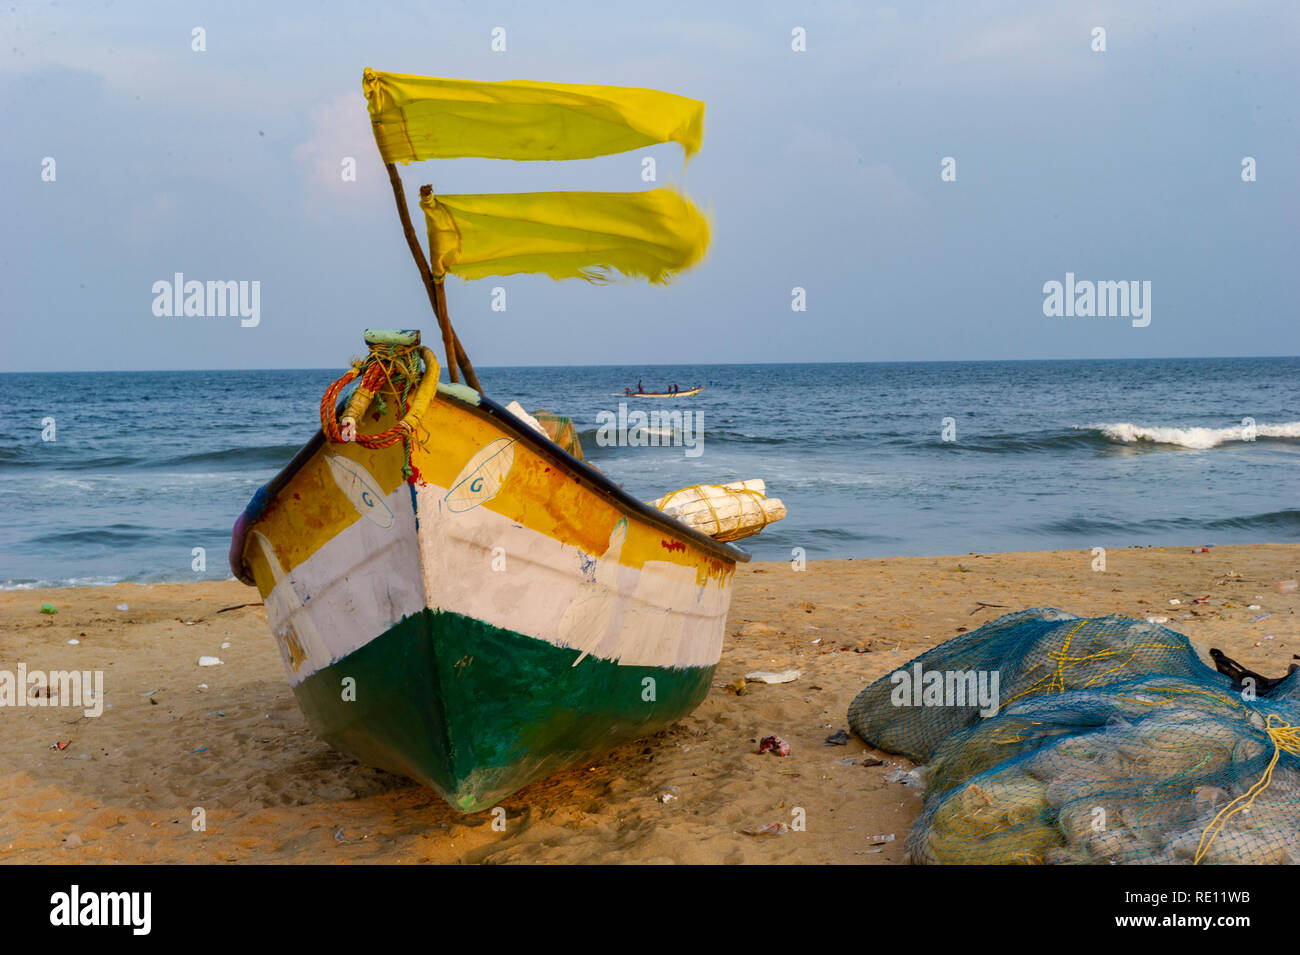 Fishing boats with fluttering flags on Marina Beach, Chennai, India Stock Photo